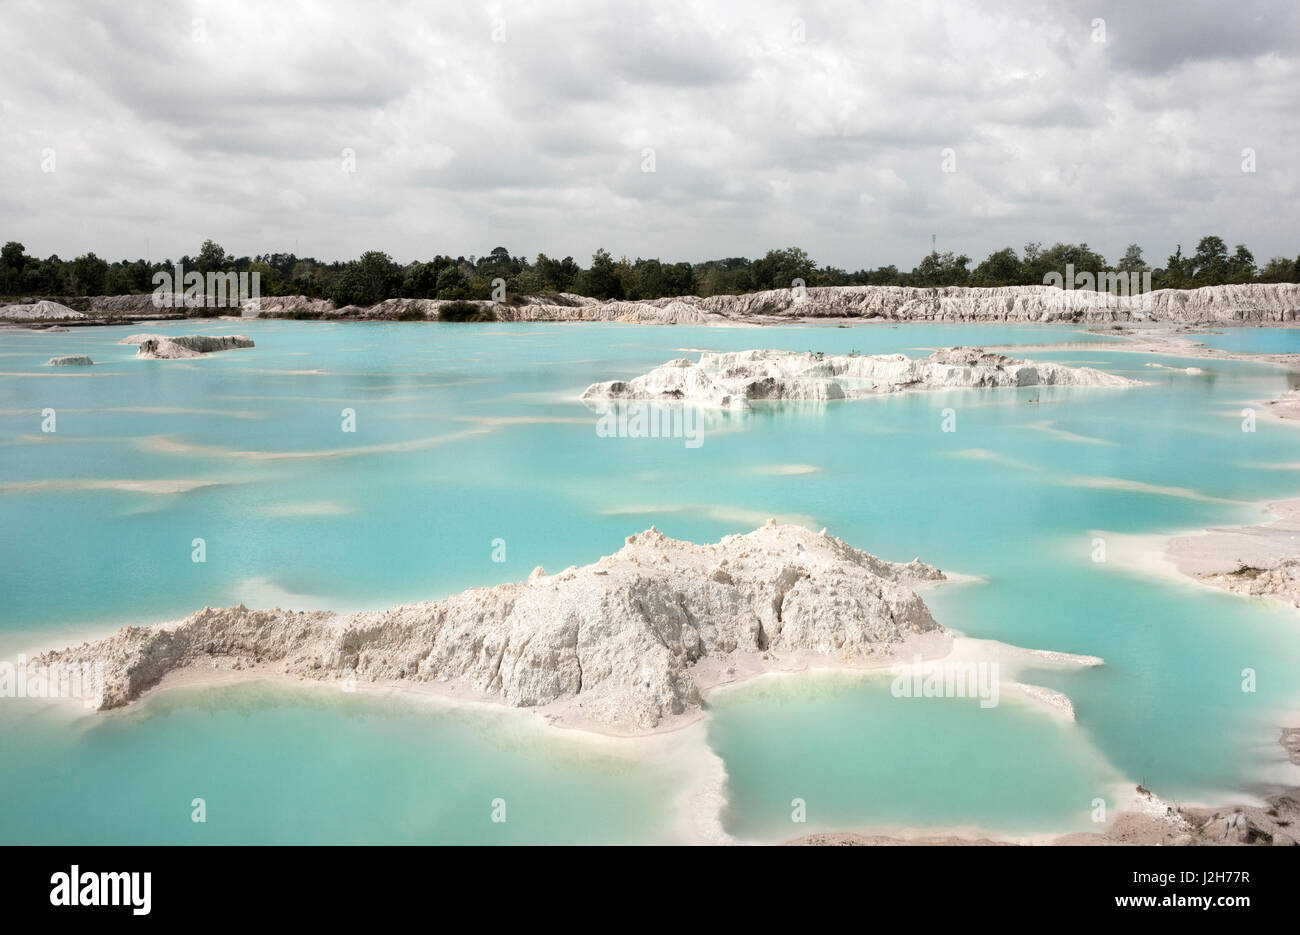 Man-made artificial lake Kaolin, turned from mining ground holes. Due to mining, holes were formed covered by rain water, forming a clear blue lake, A Stock Photo